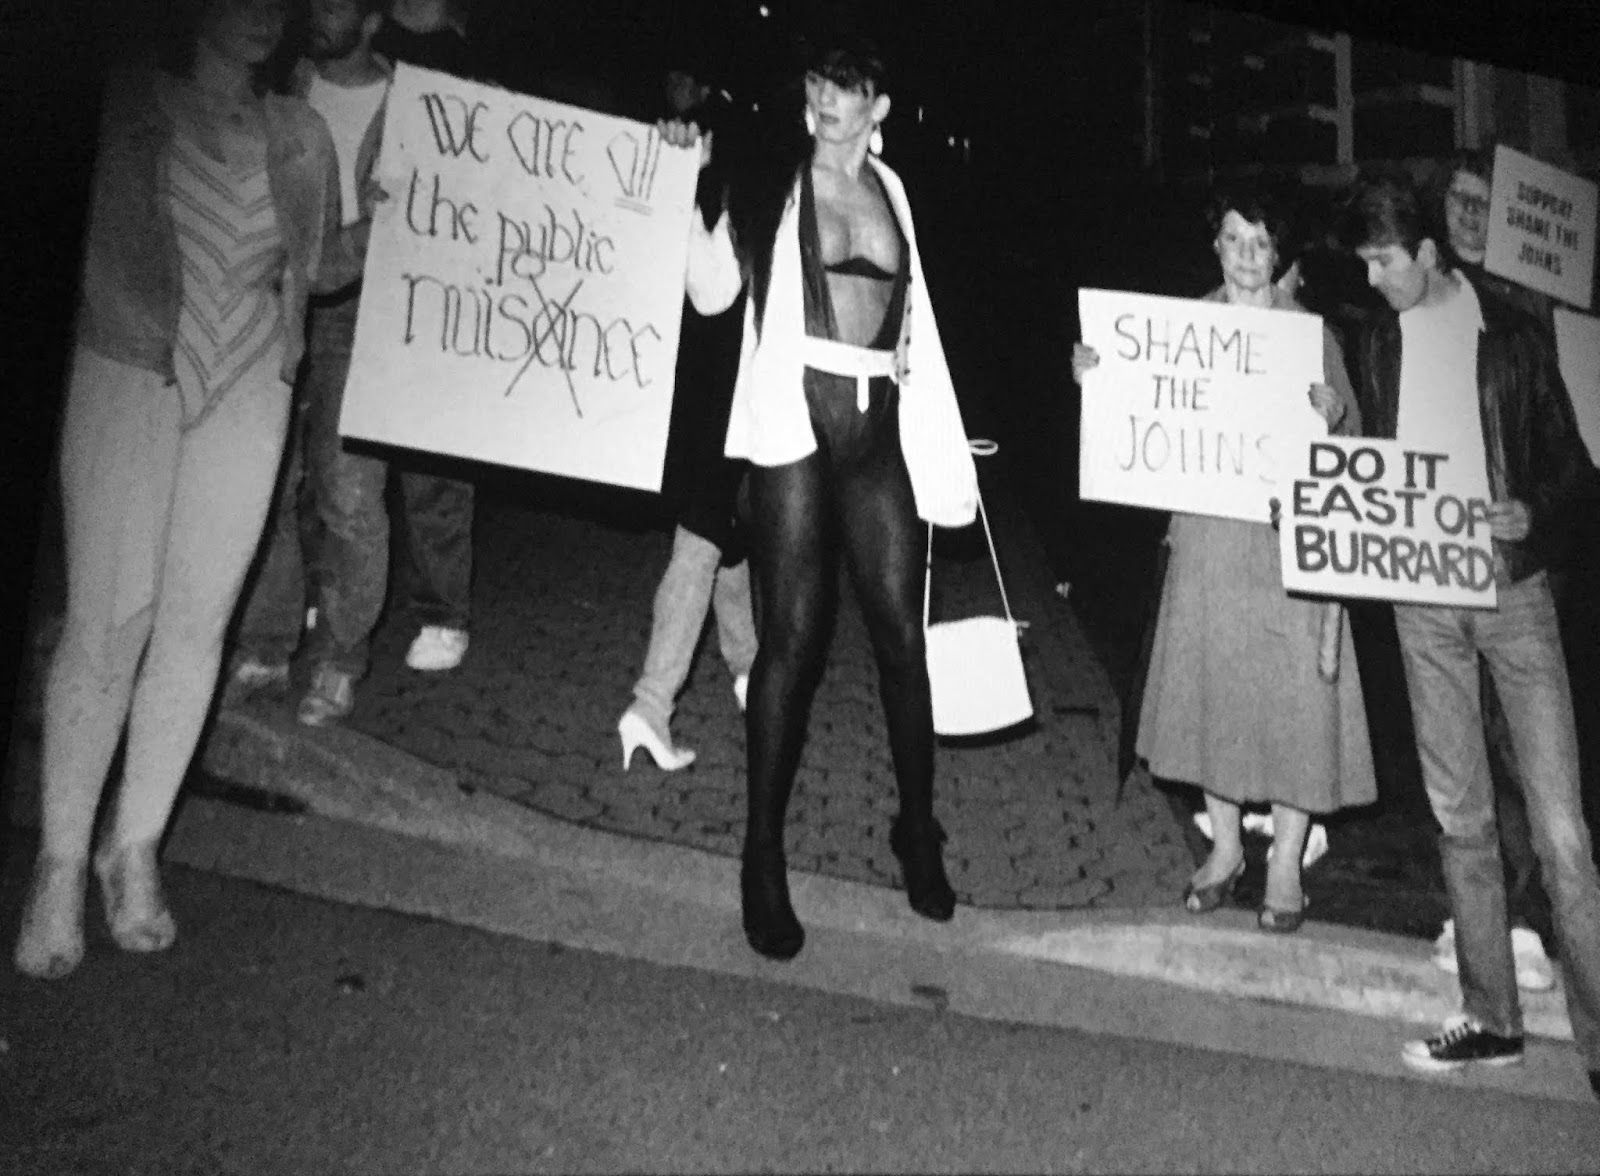 Alliance for the Safety of Prostitutes counter-pickets the Shame the Johns protest, Friday night, June 8, 1984.